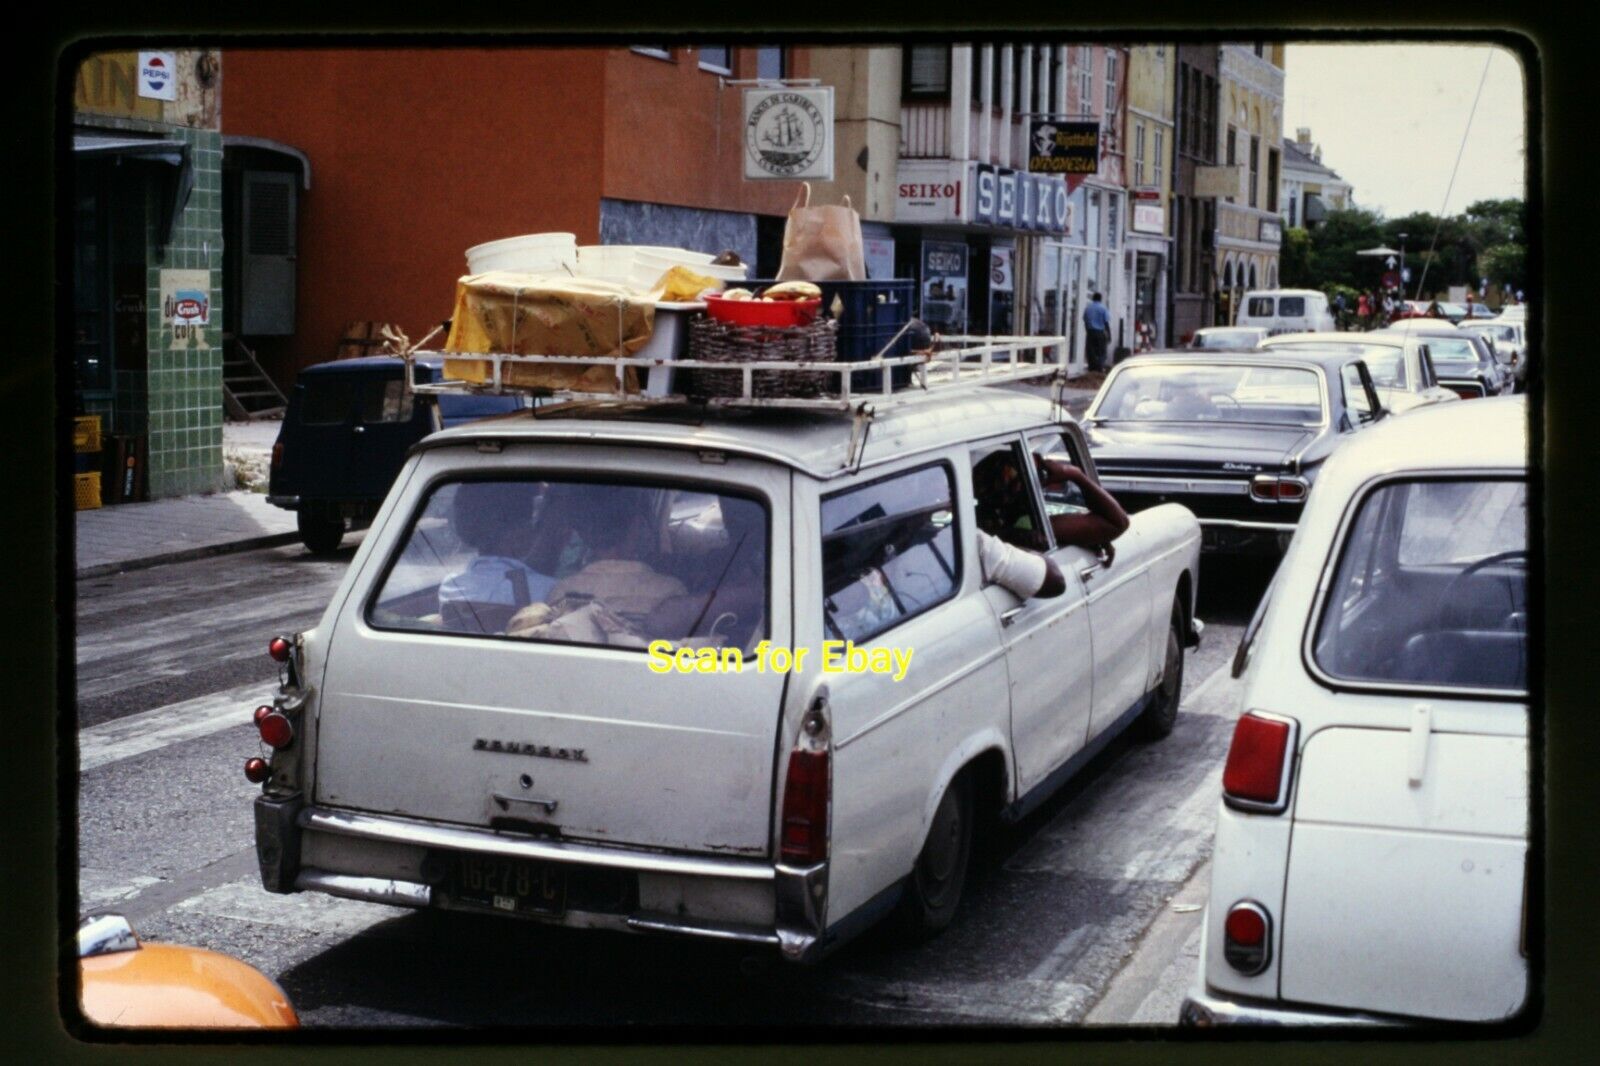 Peugeot Station Wagon Car in Curacao in 1973, Original Slide aa 4-22a